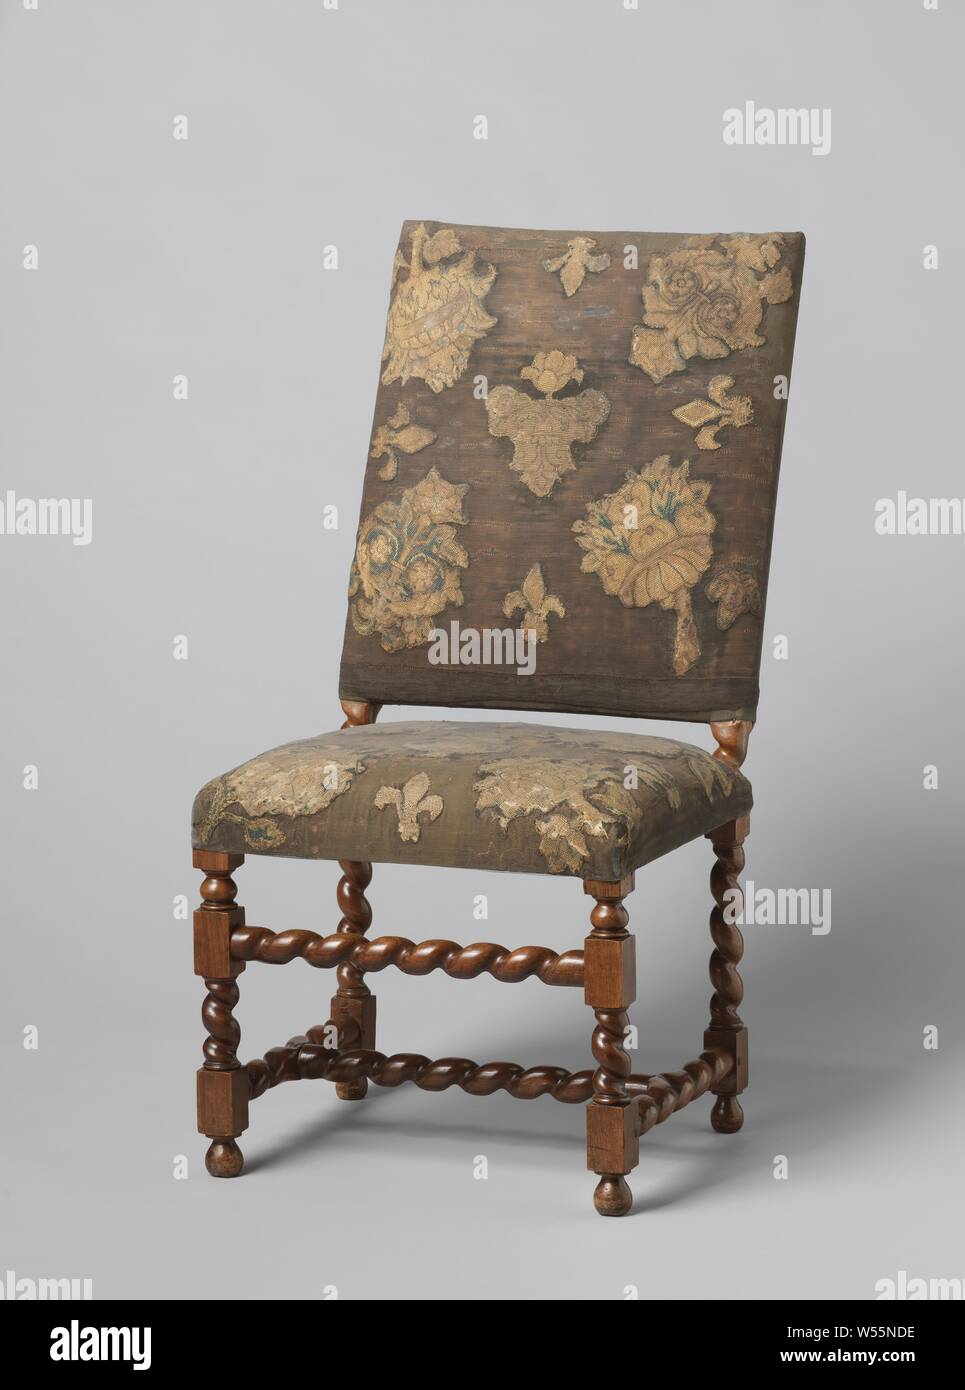 Furniture, Walnut chair covered with black velvet and tapestry sew-on. The furniture has slung legs, which are connected by an H-shaped cross and an upper sport, all also slung. The tapestry decoration on the upholstery shows flowers and lilies in green, salmon color, liver color and blue. The lining of the ridges is yellow damask. The webbing is old. One chair from a series of six, anonymous, Northern Netherlands, 1650 - 1700, wood (plant material), walnut (hardwood), velvet (fabric weave), damask, h 112 cm × w 56 cm × d 63.5 cm h 51 cm × w 56 cm × d 41 cm Stock Photo